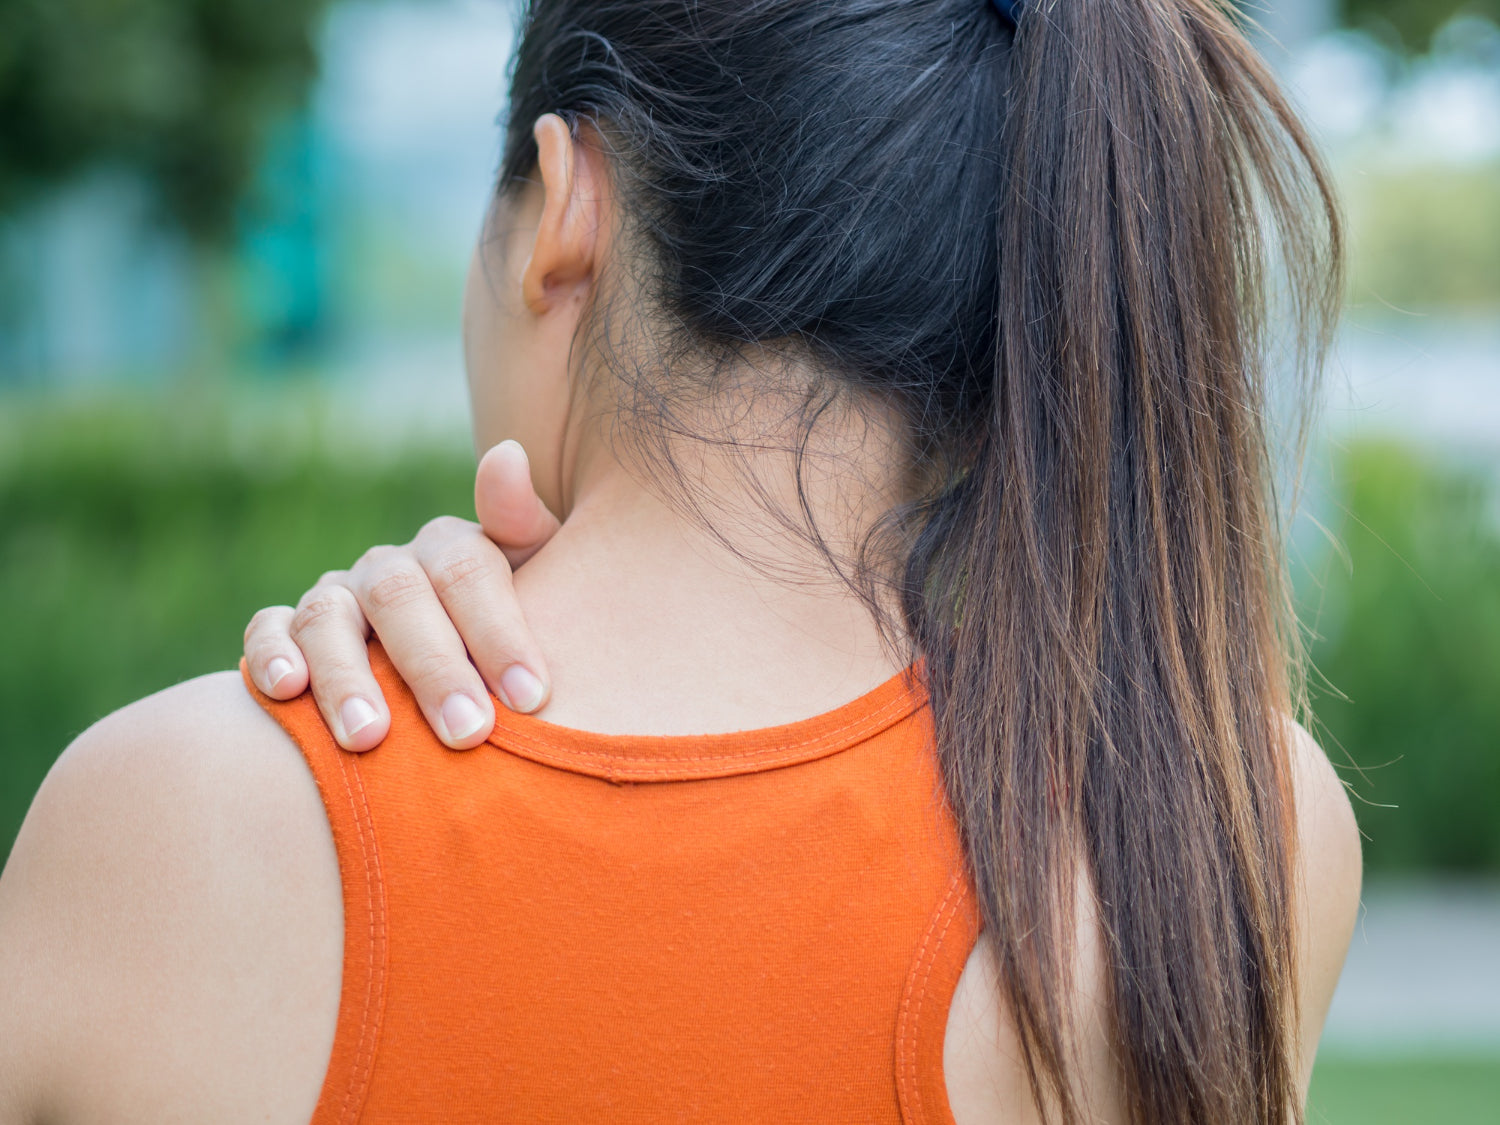 A woman holding her upper back in pain